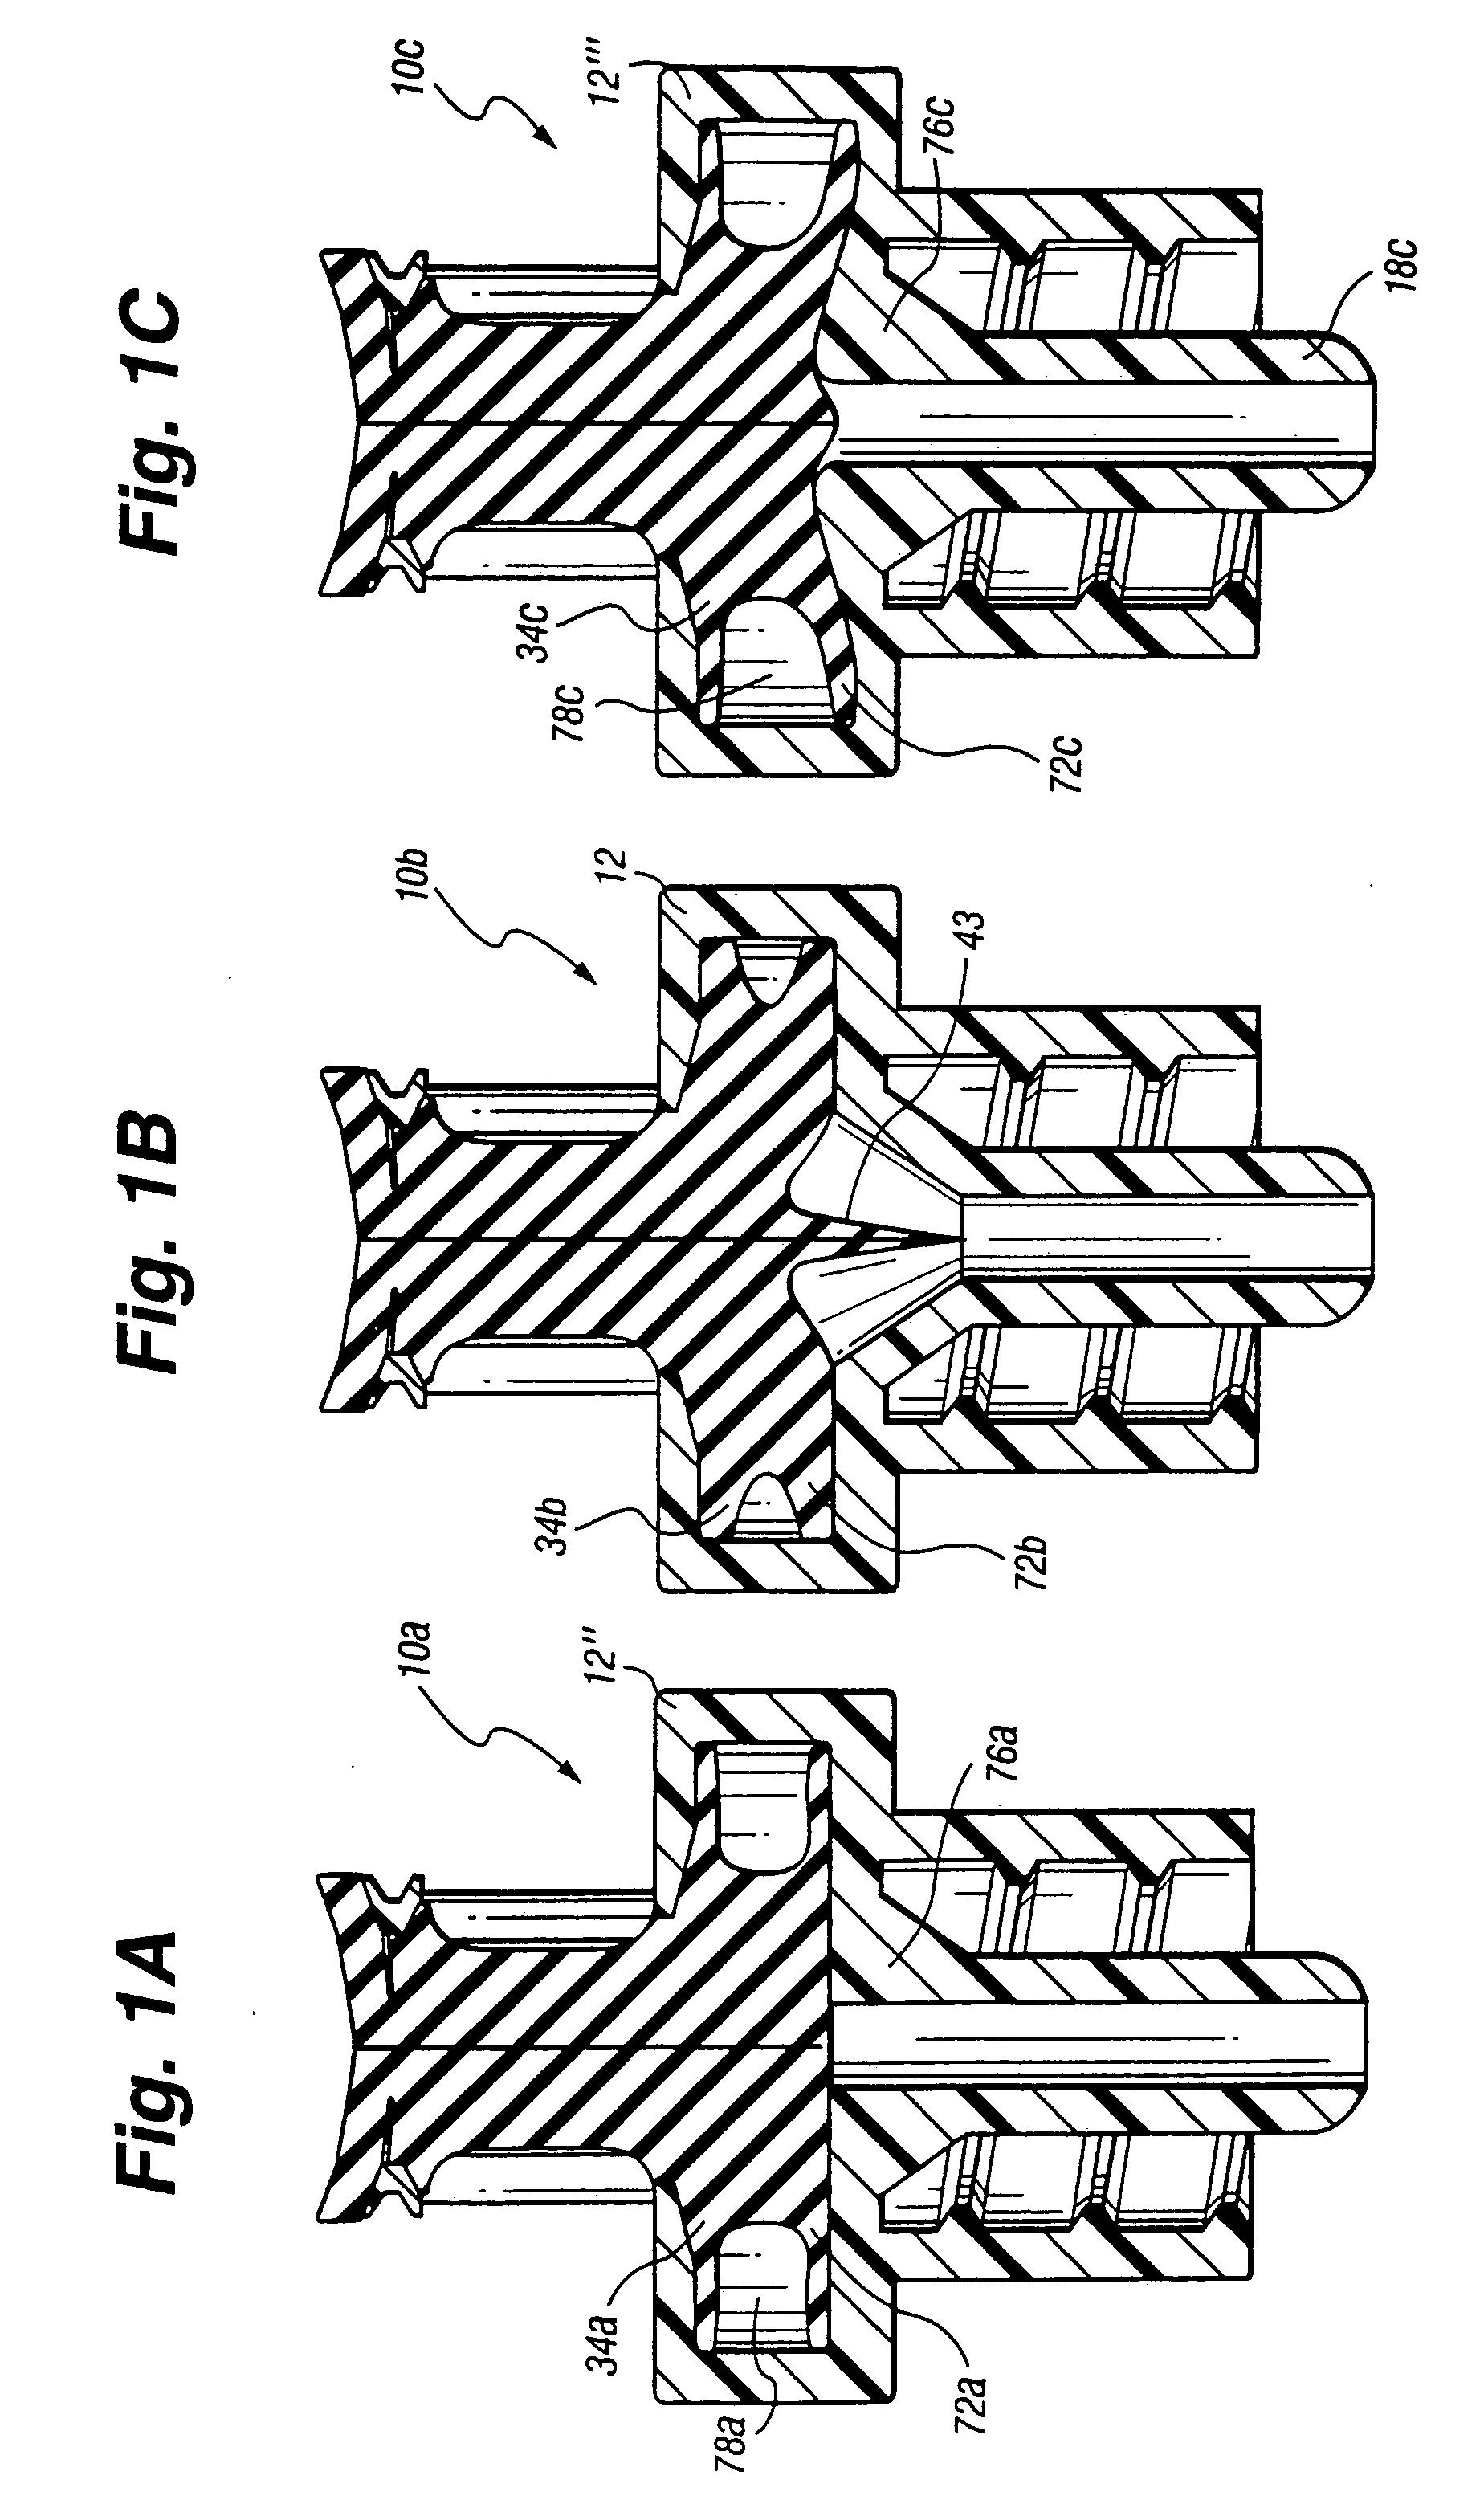 Luer receiver and method for fluid transfer